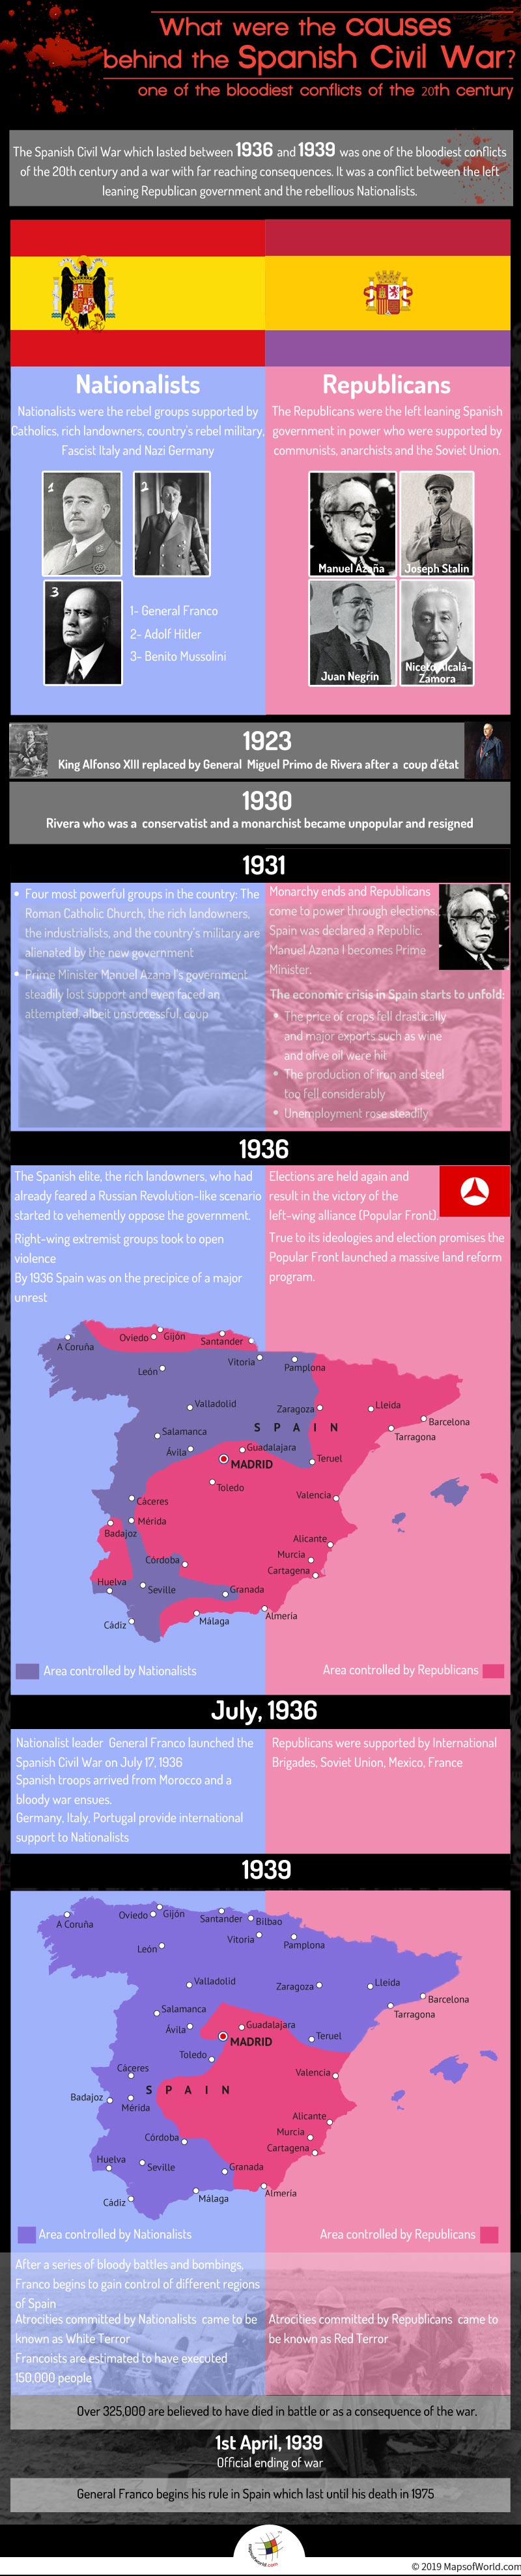 Infographic Giving Information on The Spanish Civil War